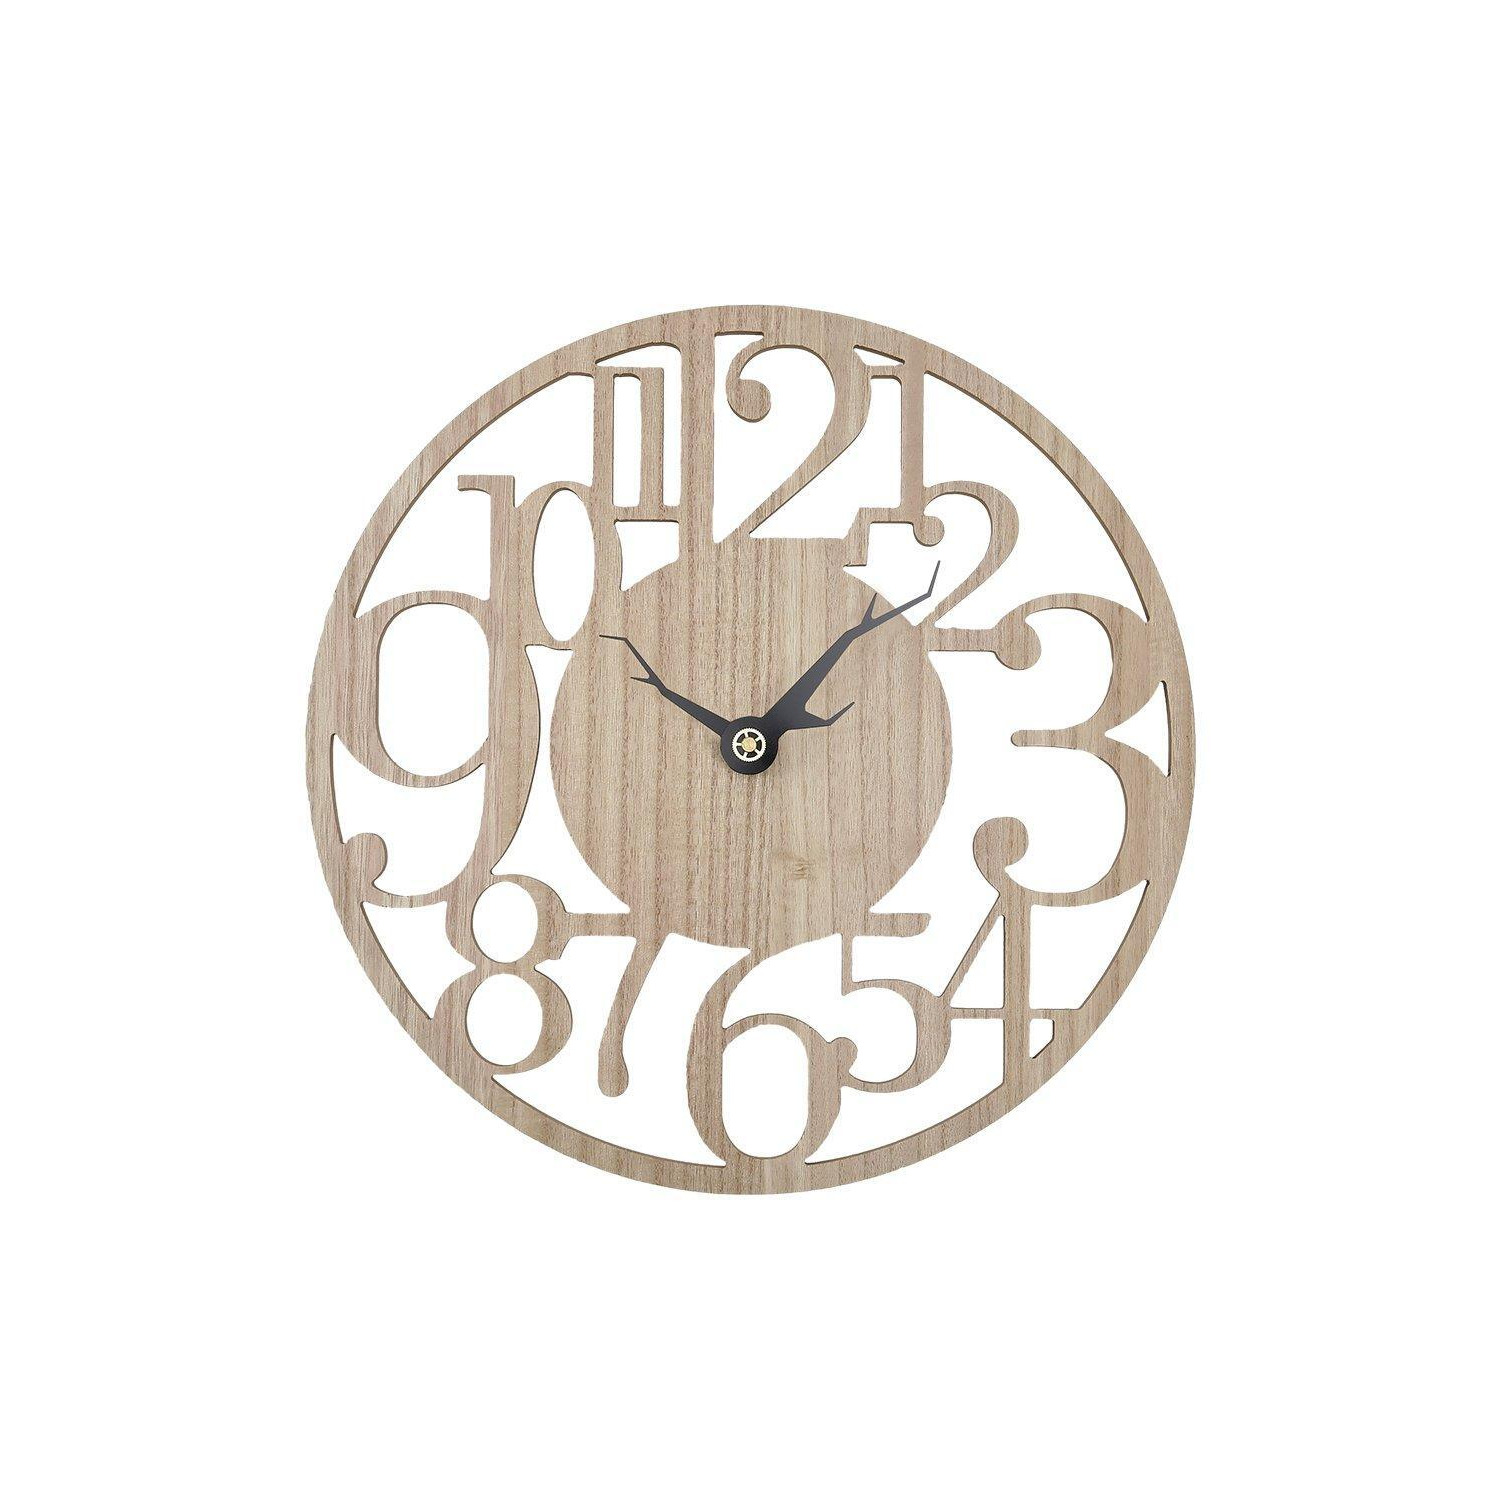 Modern Oversized Number Wooden Wall Clock - image 1